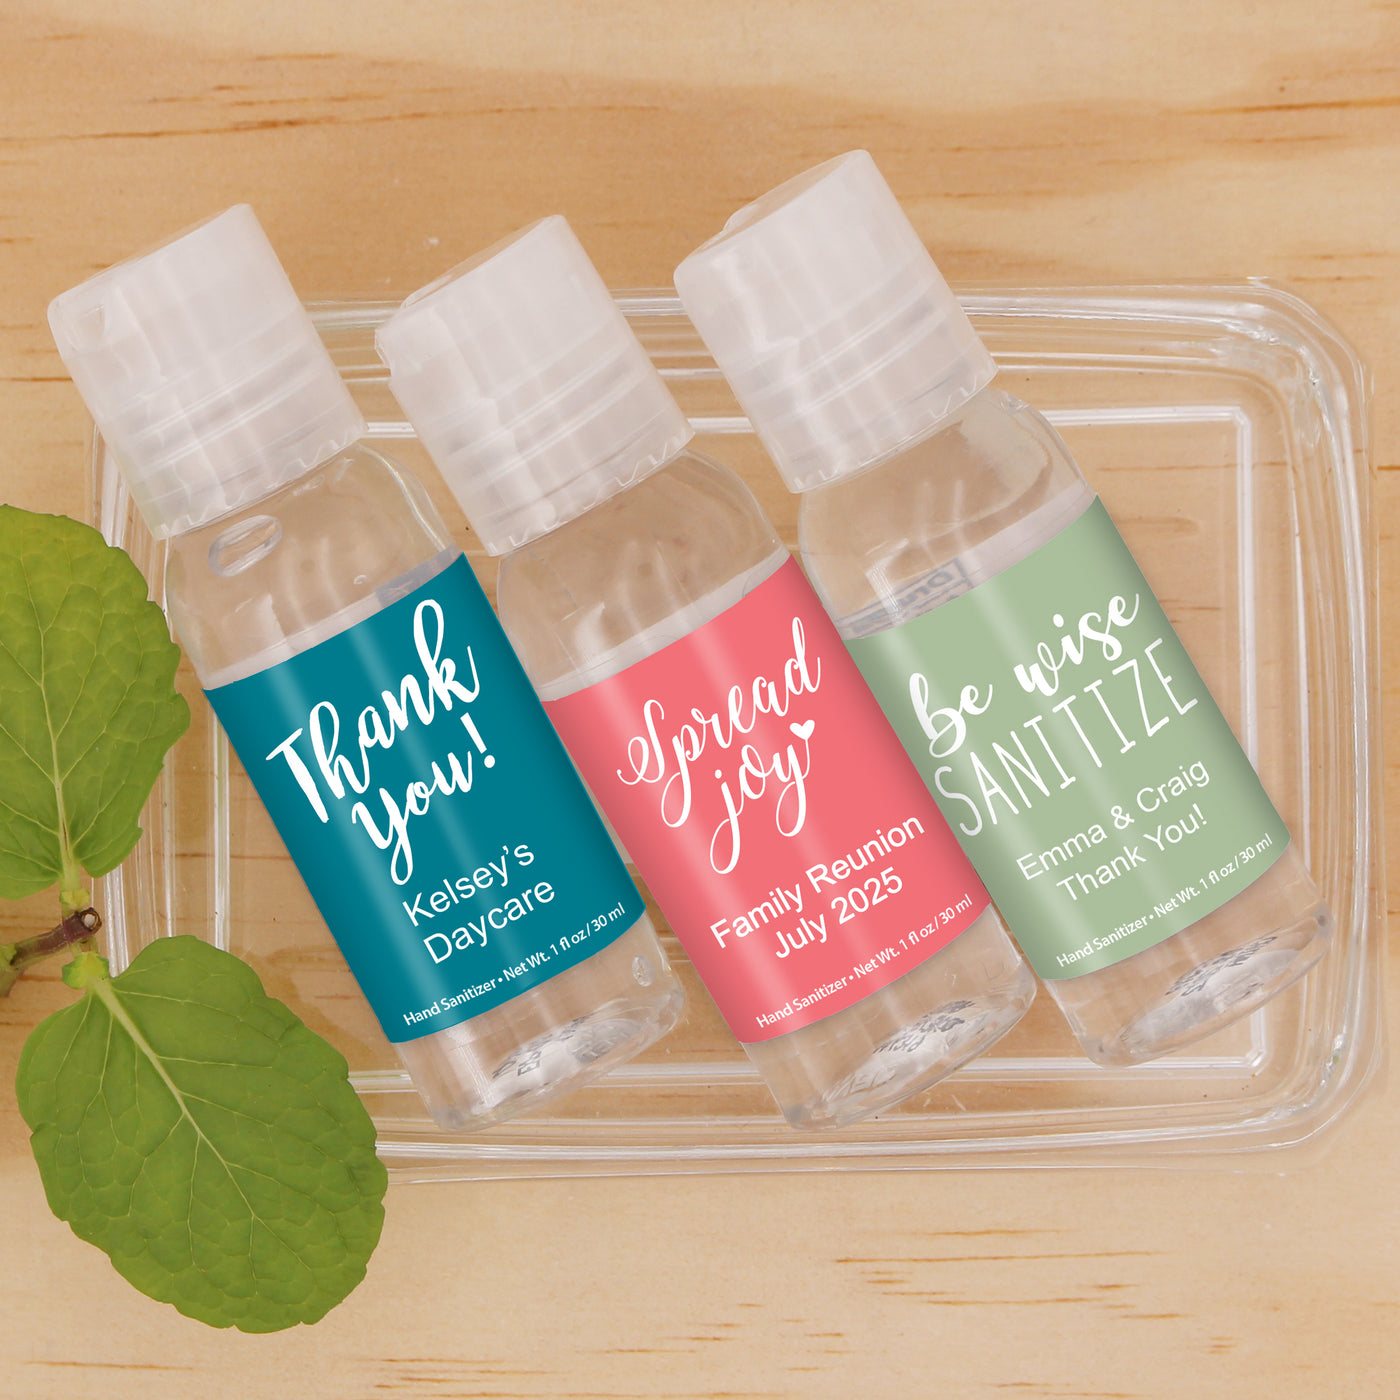 Catchy Sayings Personalized Hand Sanitizers